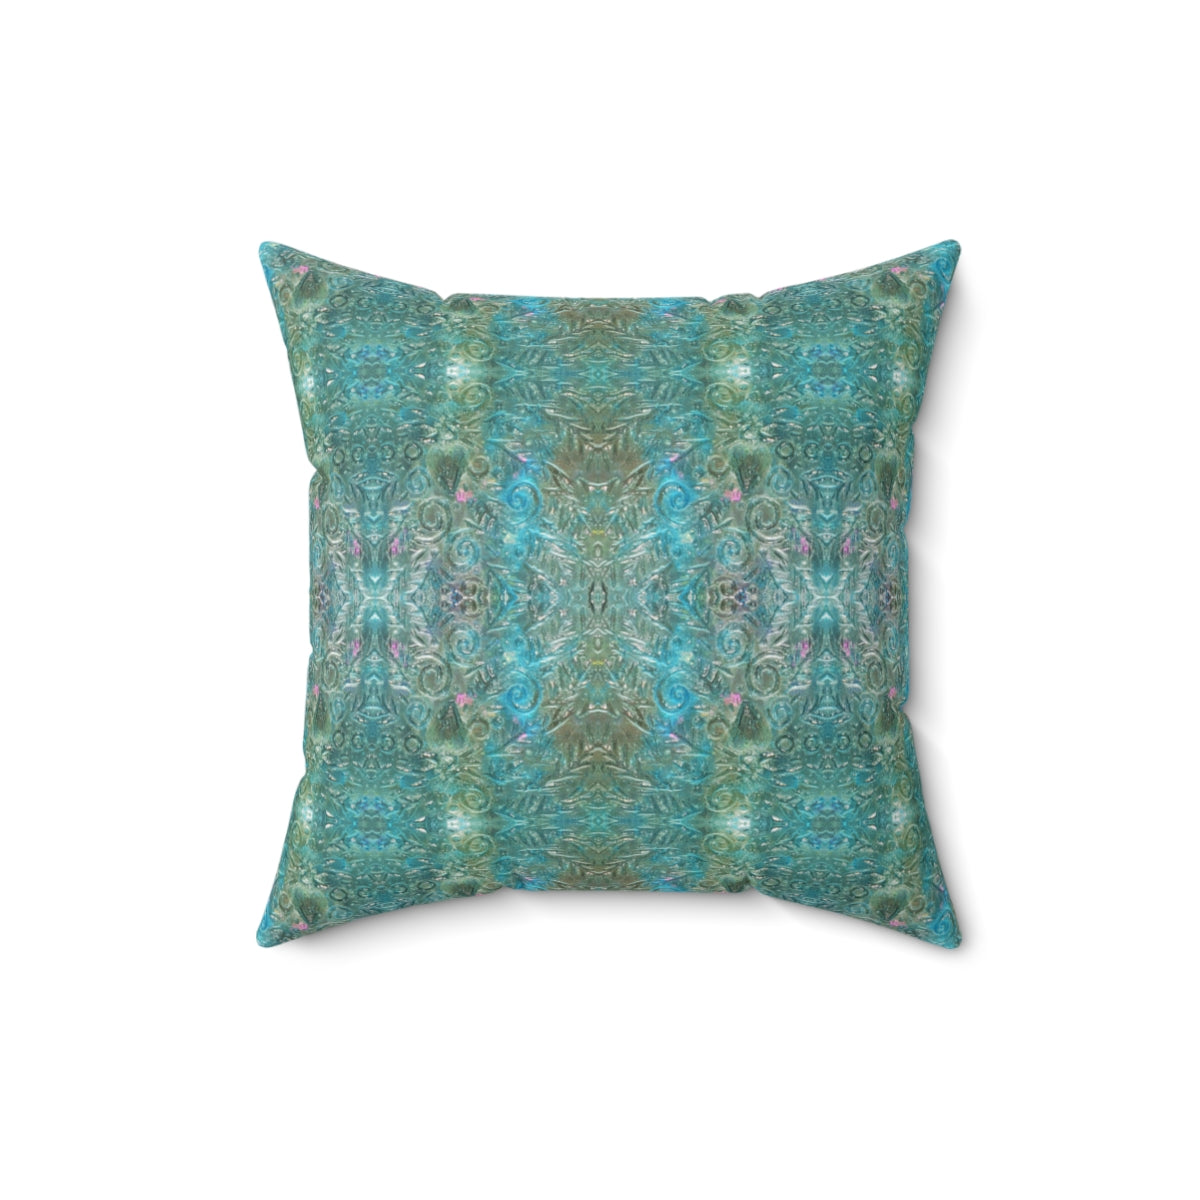 gorgeous blue -pillows for home decorating